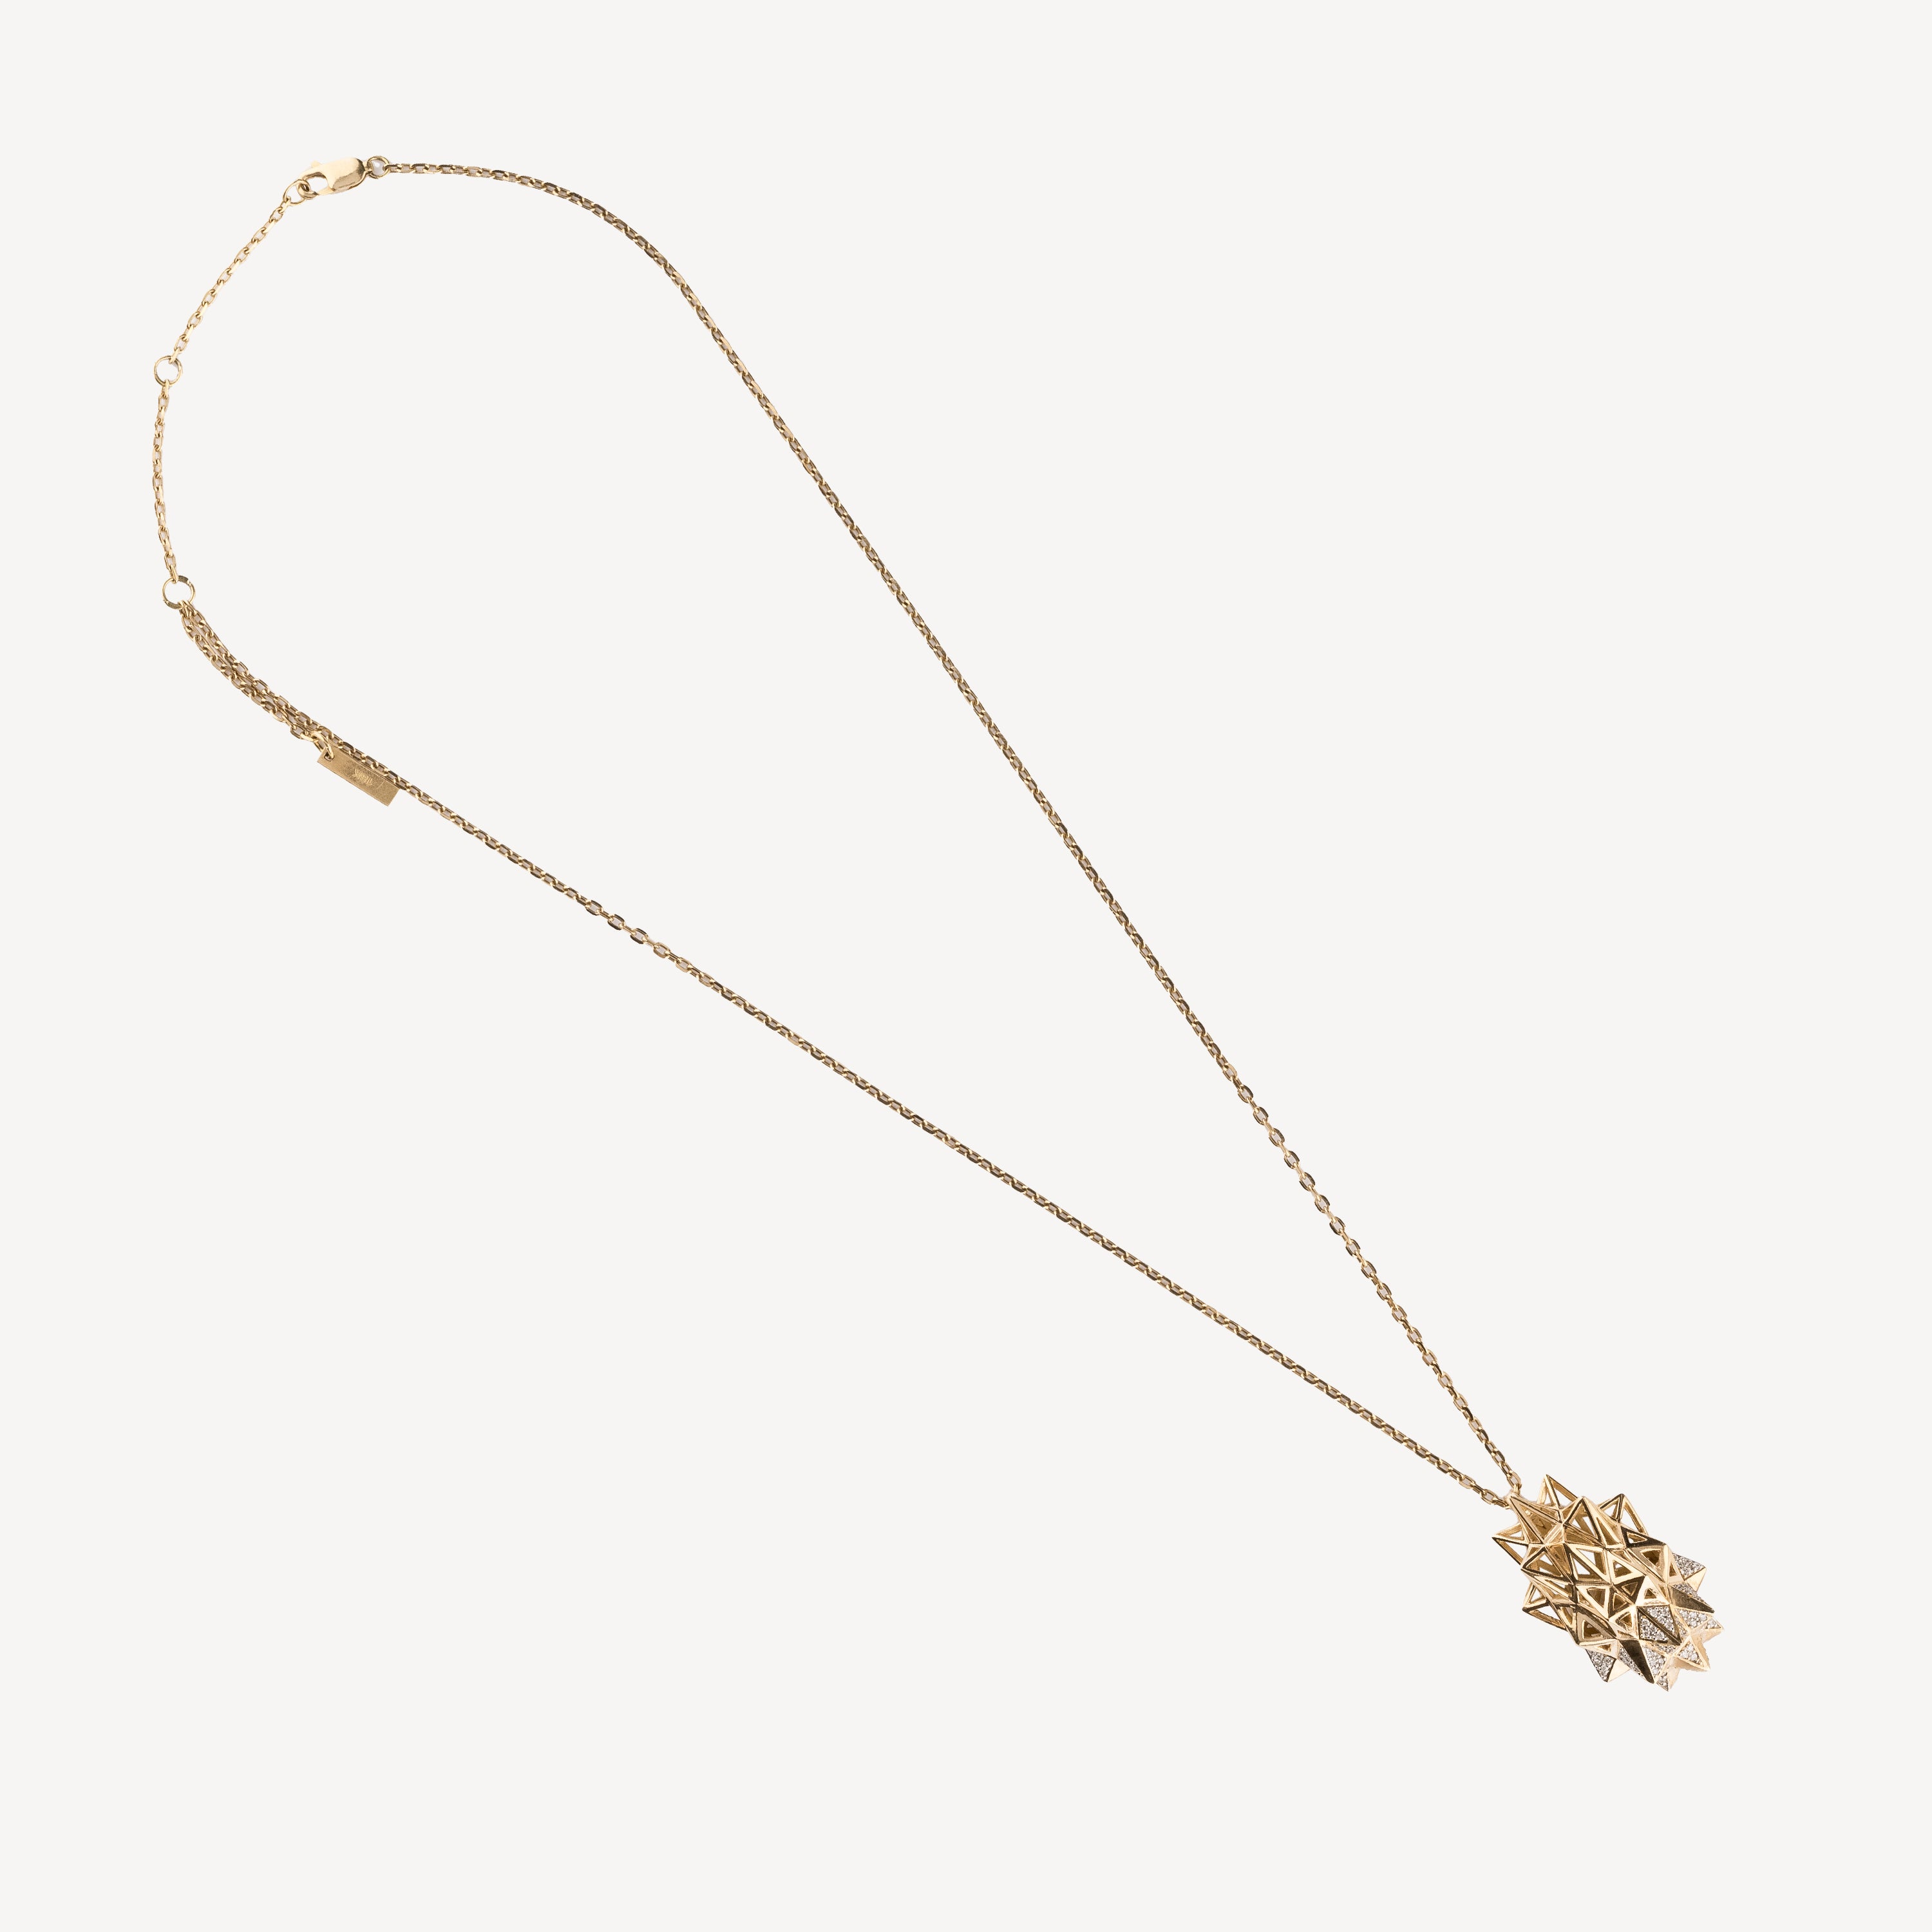 Flatback Necklace in Gold and Stellar Diamonds